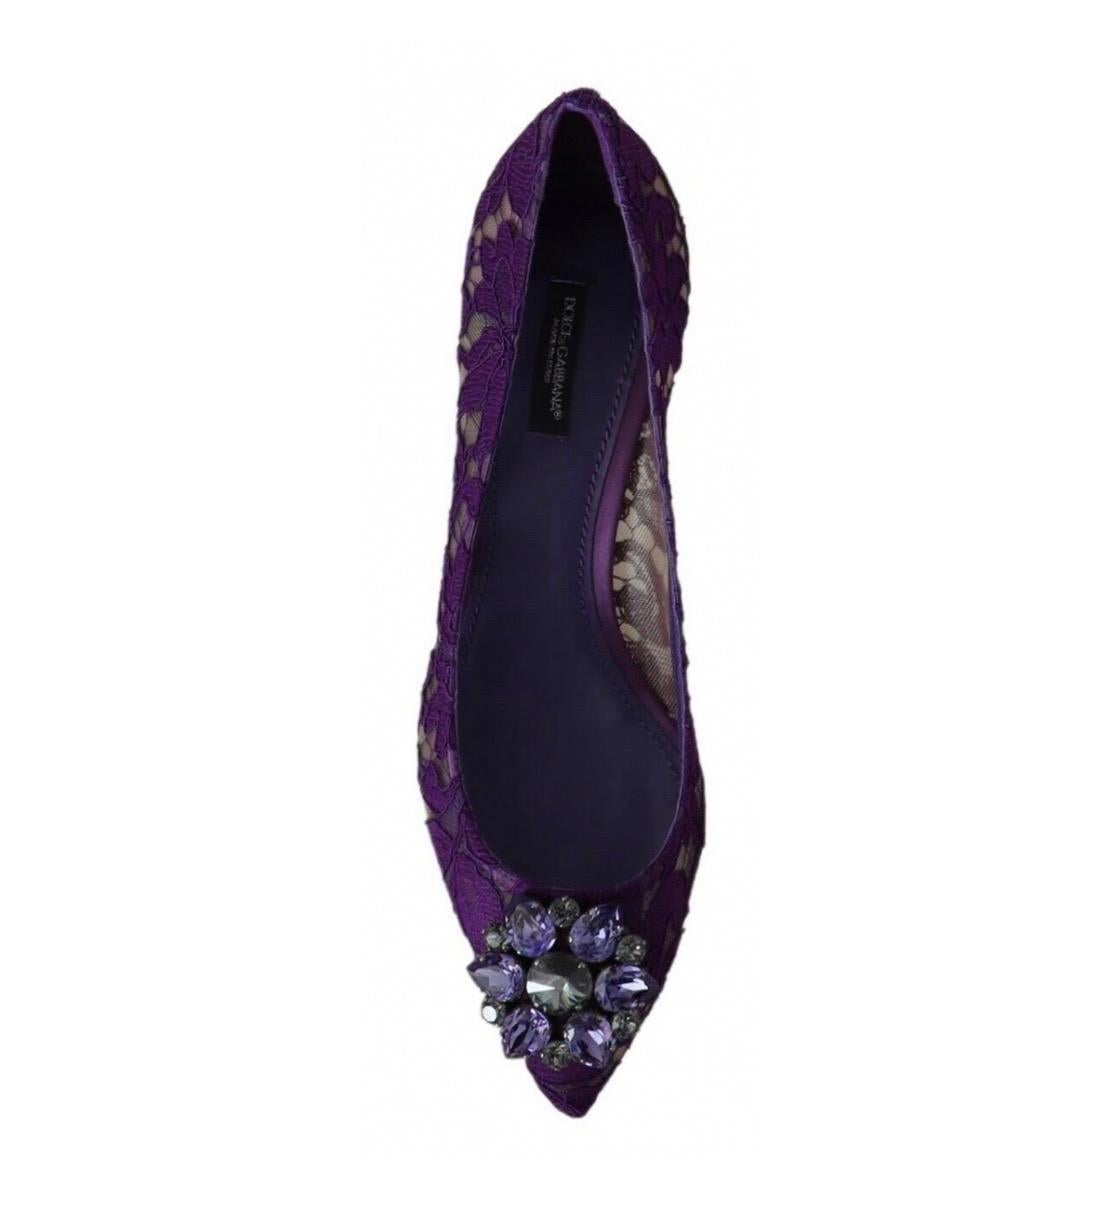 Black Dolce & Gabbana purple PUMP lace
shoes with jewel detail on the top heels  For Sale